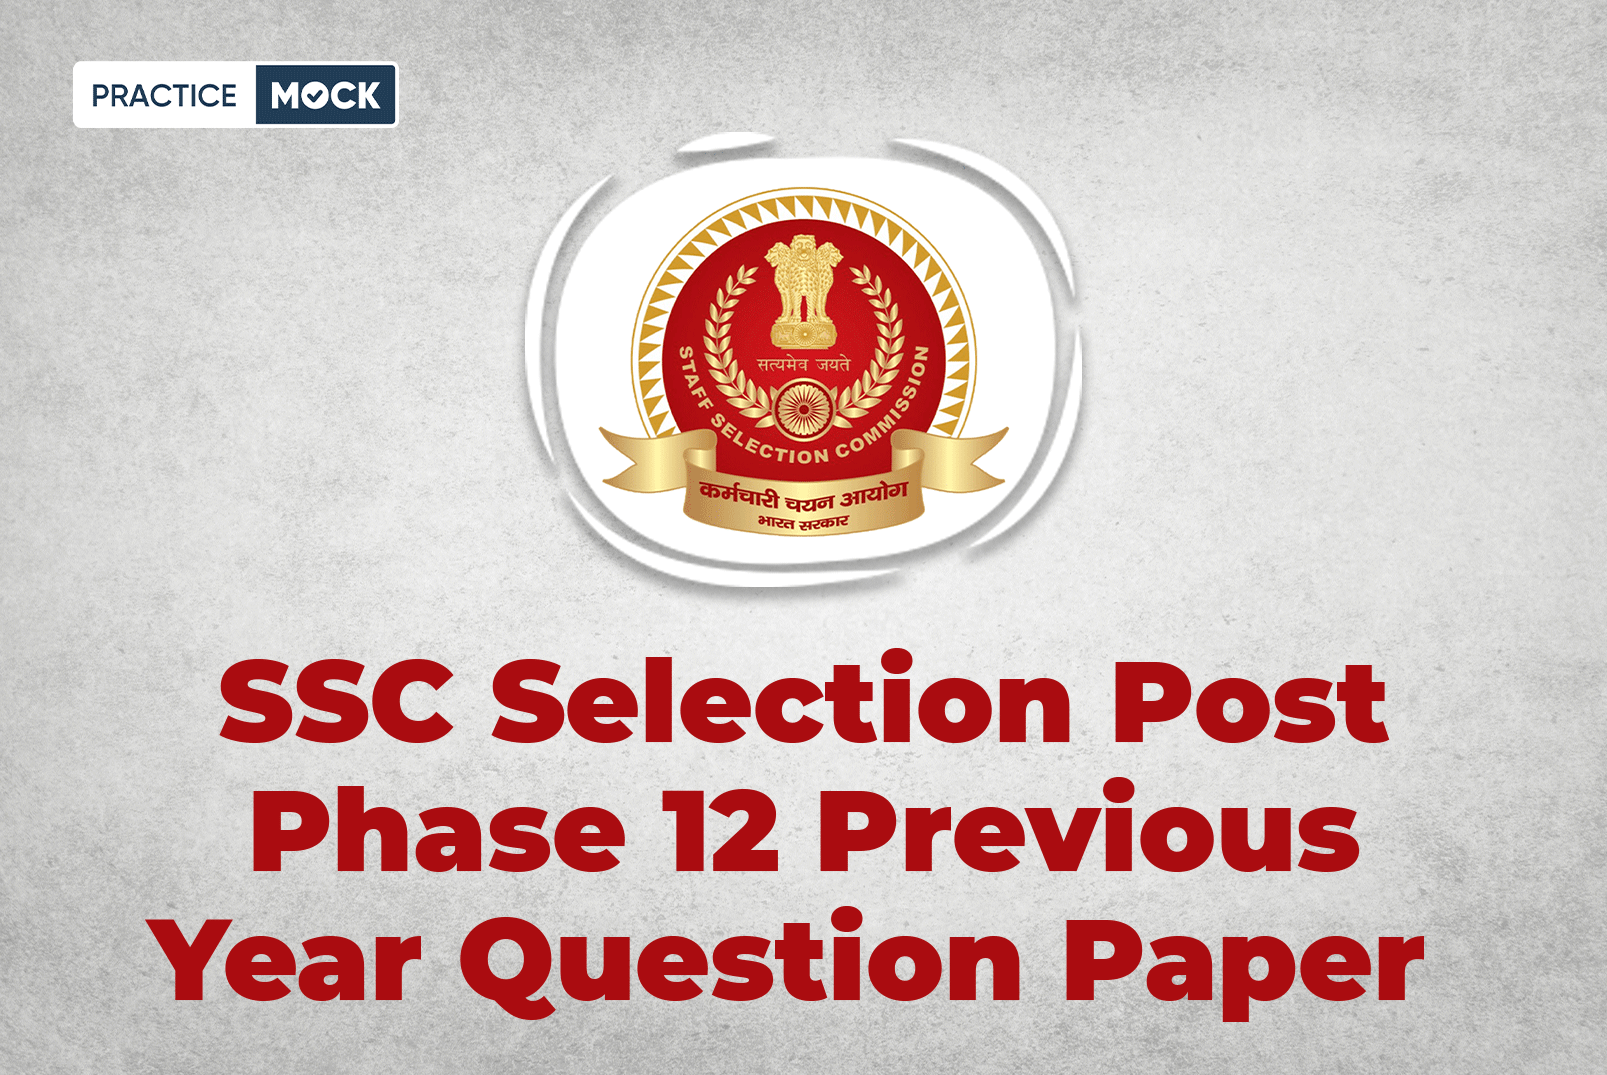 SSC Selection Post Phase 12 Previous Year Question Paper